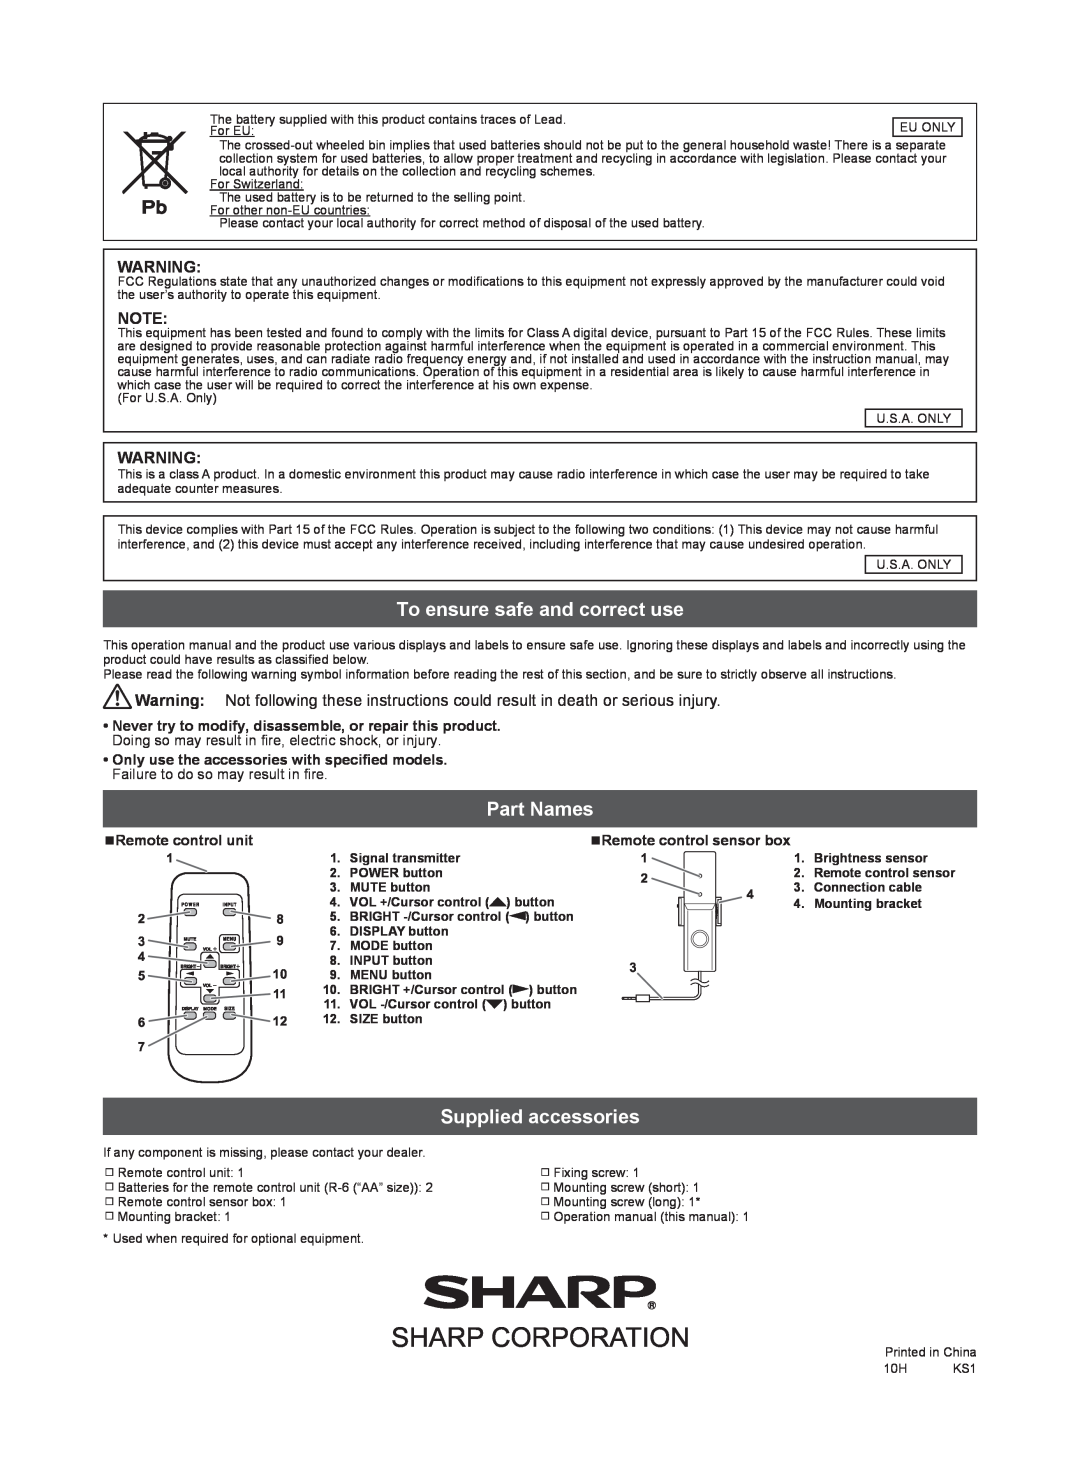 Sharp PN-ZR01 operation manual To ensure safe and correct use, Part Names, Supplied accessories, nRemote control unit 